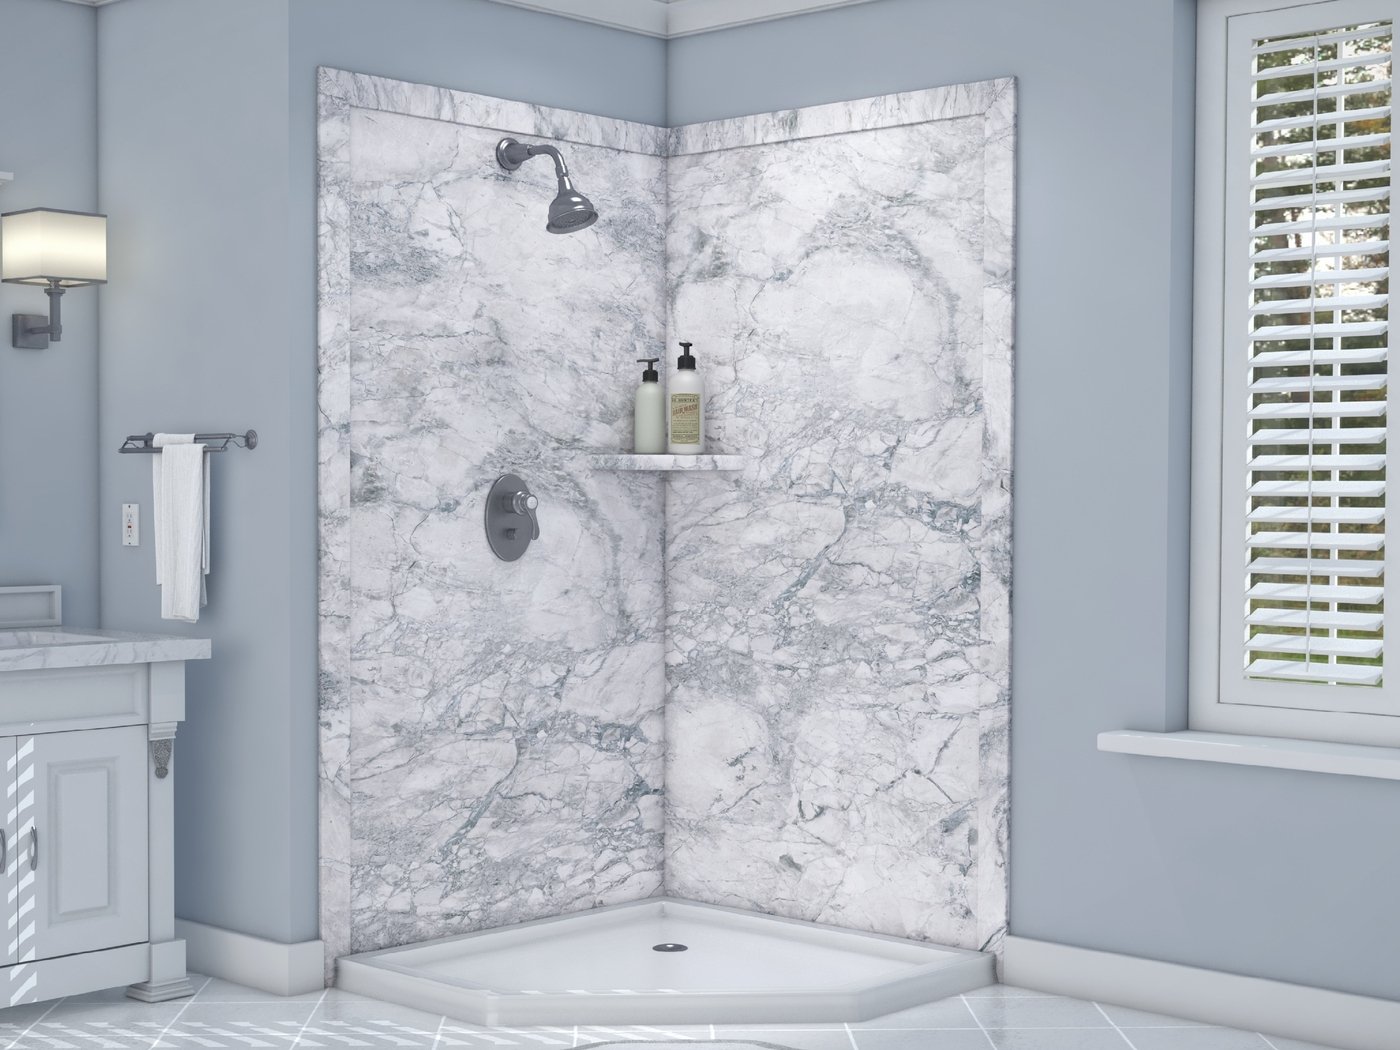 3 Expert Tips To Choose Shower Walls And Surrounds VisualHunt